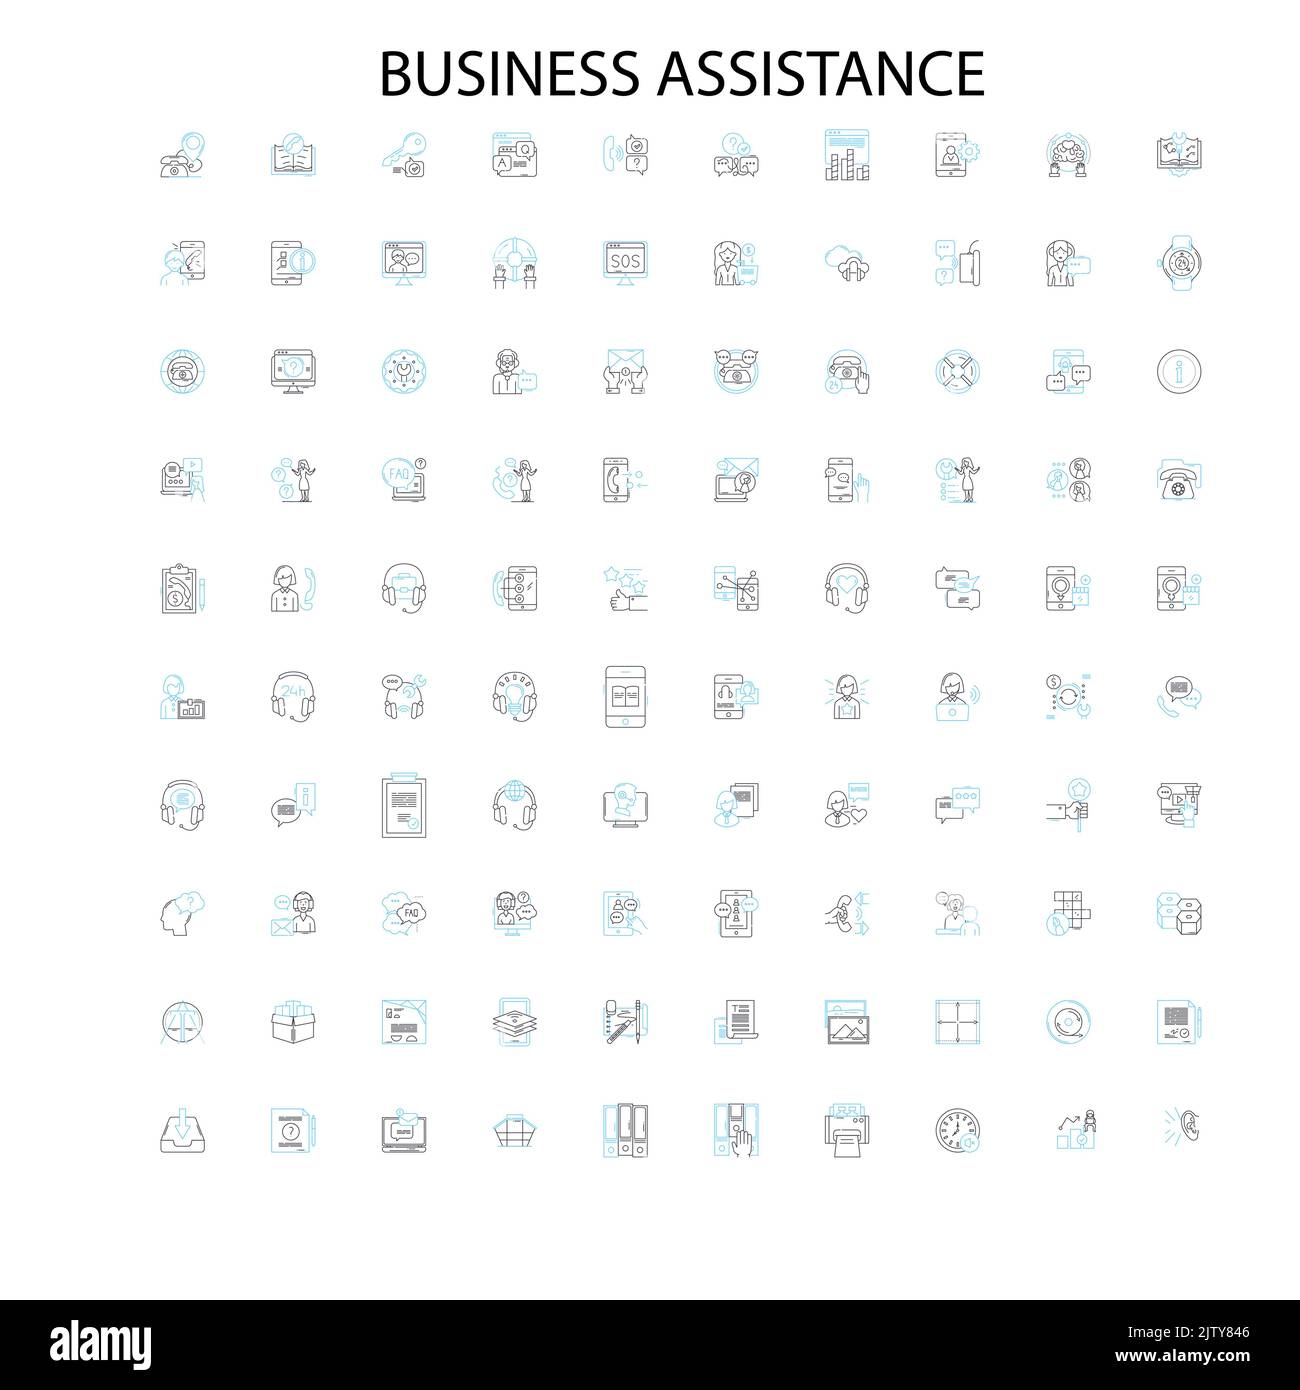 business assistance icons, signs, outline symbols, concept linear illustration line collection Stock Vector